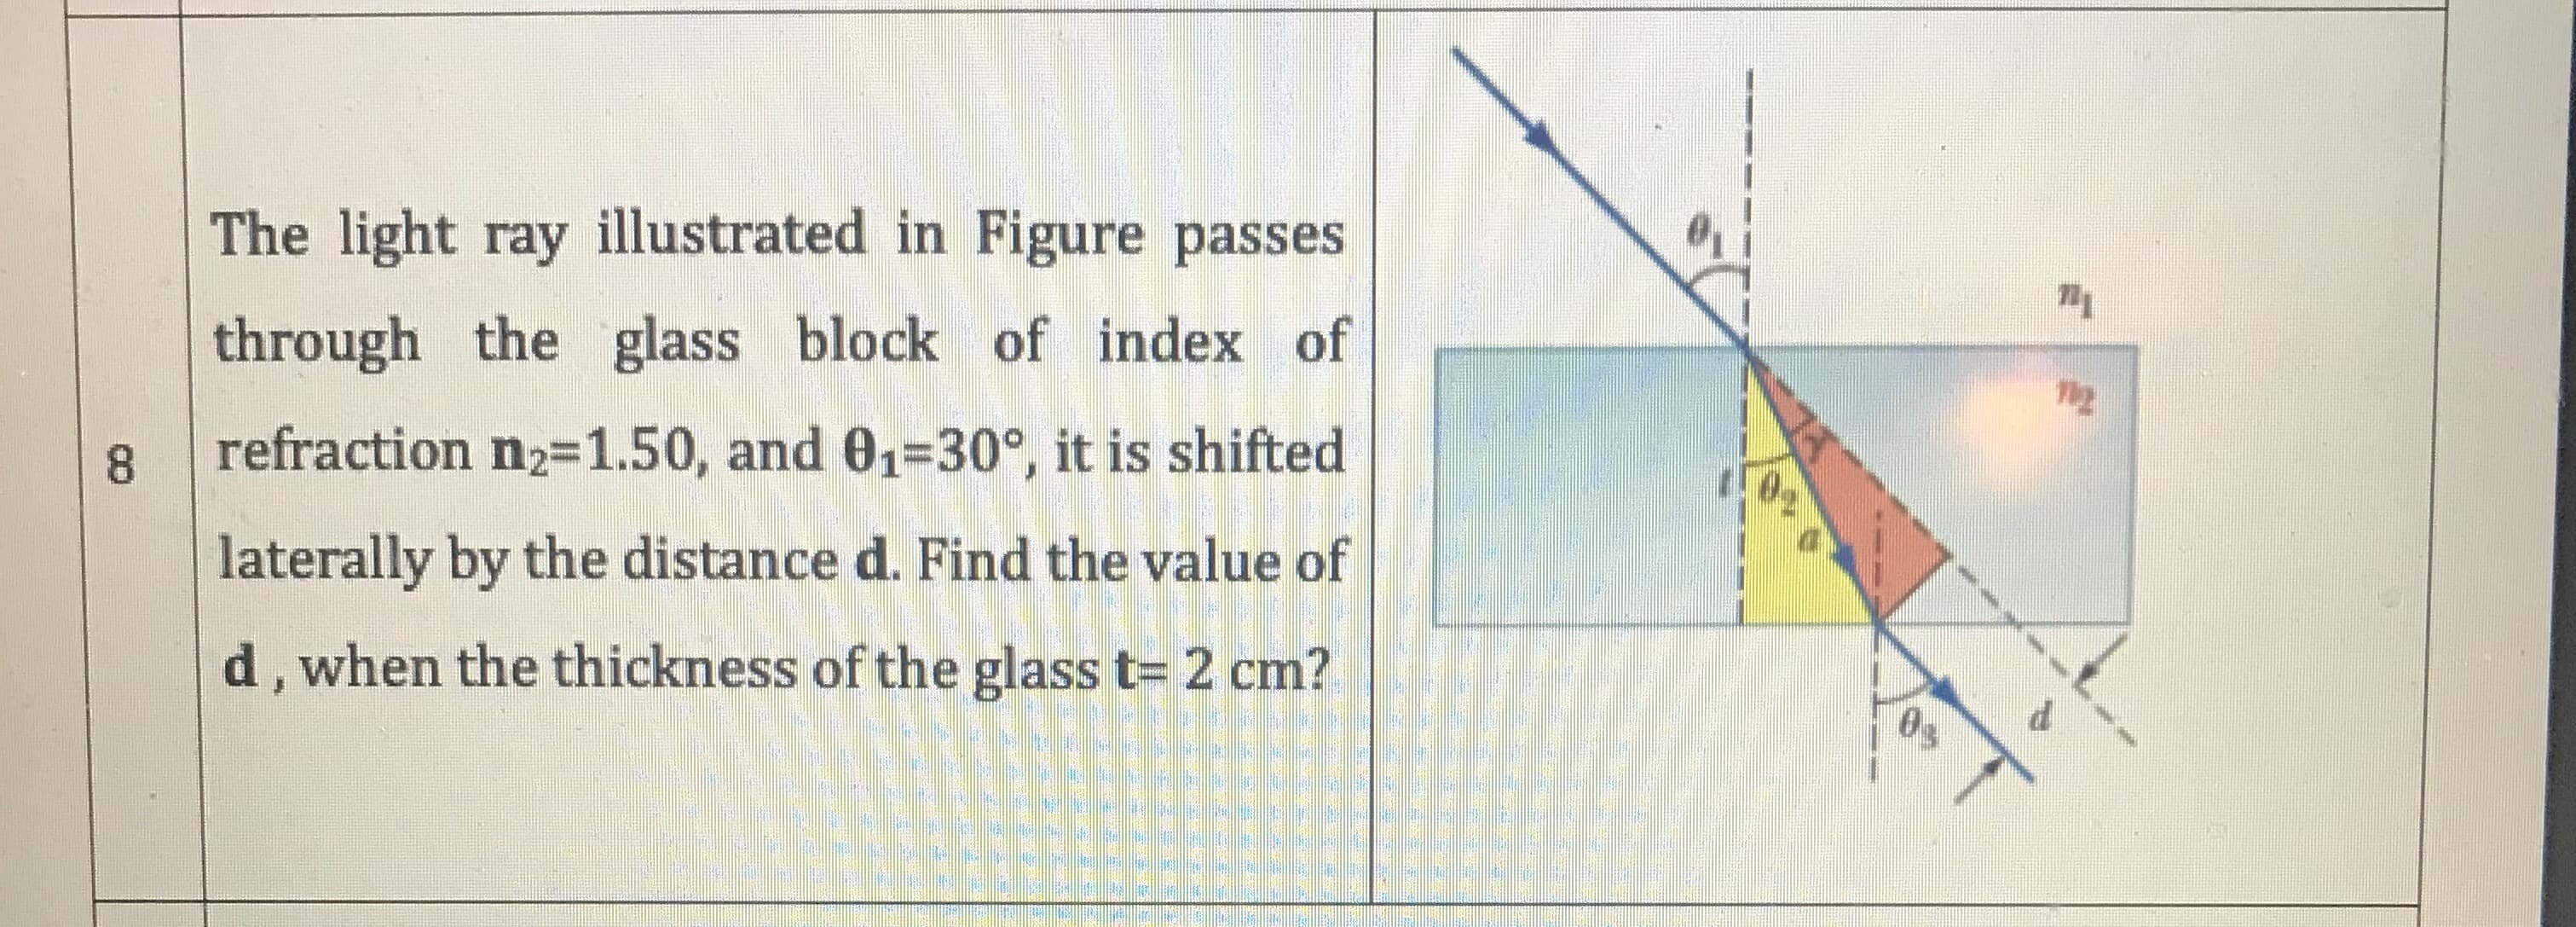 The light ray illustrated in Figure passes
through the glass block of index of
refraction n2-1.50, and 01=30°, it is shifted
laterally by the distance d. Find the value of
d, when the thickness of the glass t= 2 cm?
8.
